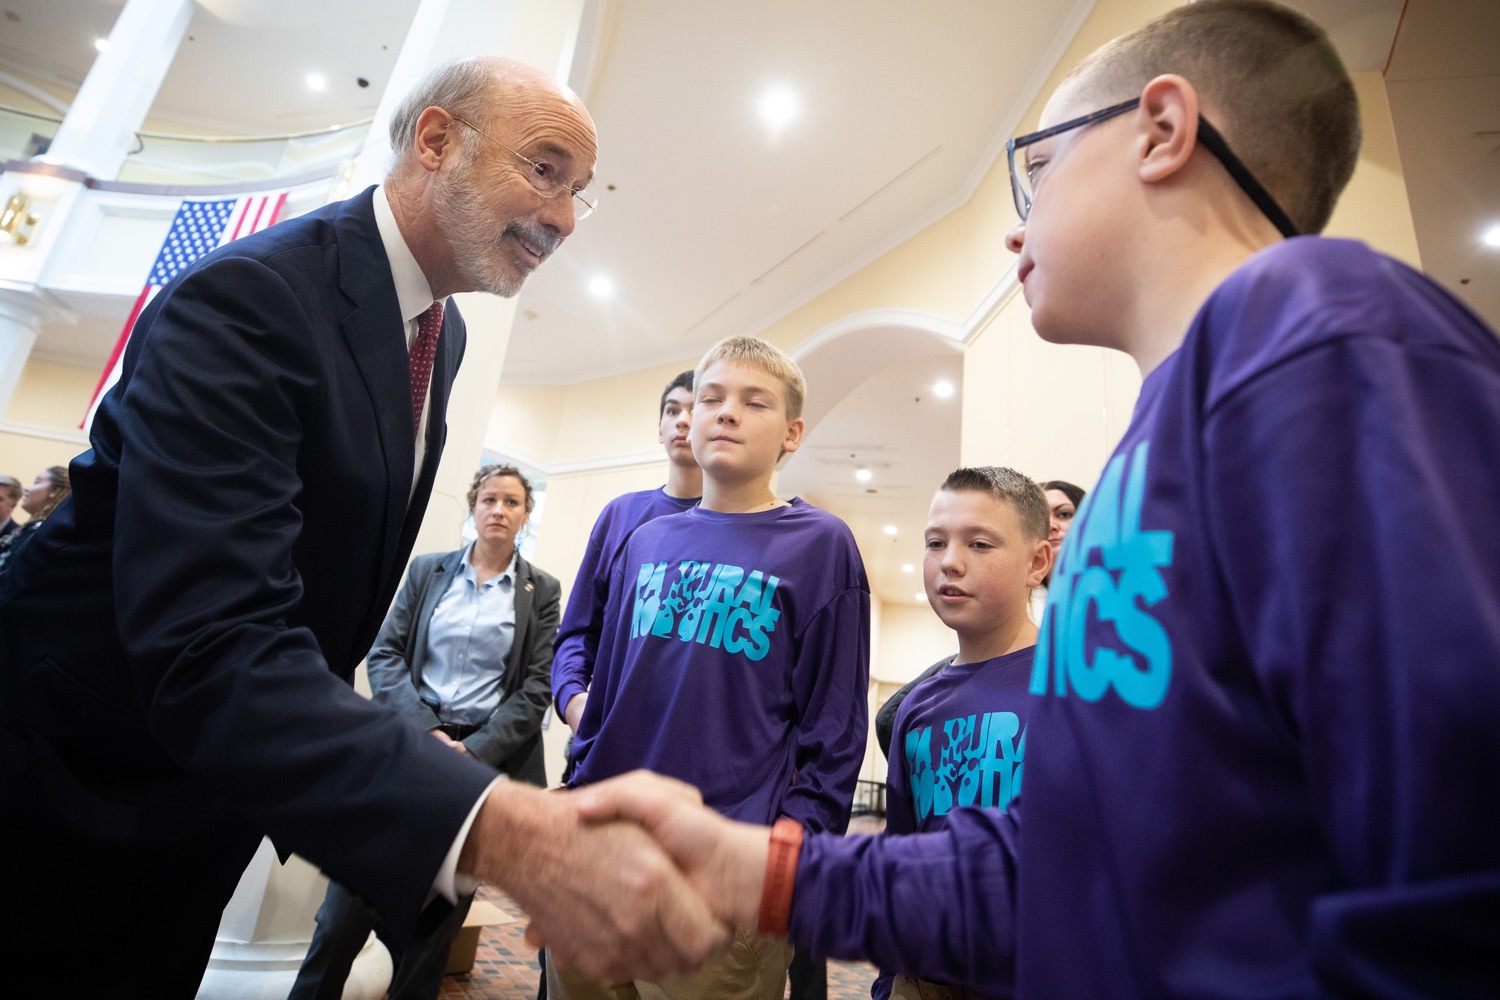 Pennsylvania Governor Tom Wolf meeting with students at the robotics demonstration.  Celebrating the success of the PAsmart workforce development program to create educational opportunities at schools across the commonwealth, Governor Tom Wolf welcomed more than 50 students from the Pennsylvania Rural Robotics Initiative to the Capitol today. The students from nine western Pennsylvania school districts showcased their skills in coding, robotics and drone technology. The Wolf administration awarded the initiative a $299,000 PAsmart Advancing Grant earlier this year. Harrisburg, PA  Tuesday, November 12, 2019<br><a href="https://filesource.amperwave.net/commonwealthofpa/photo/17587_gov_pasmart_rural_robotics_dz_012.jpg" target="_blank">⇣ Download Photo</a>